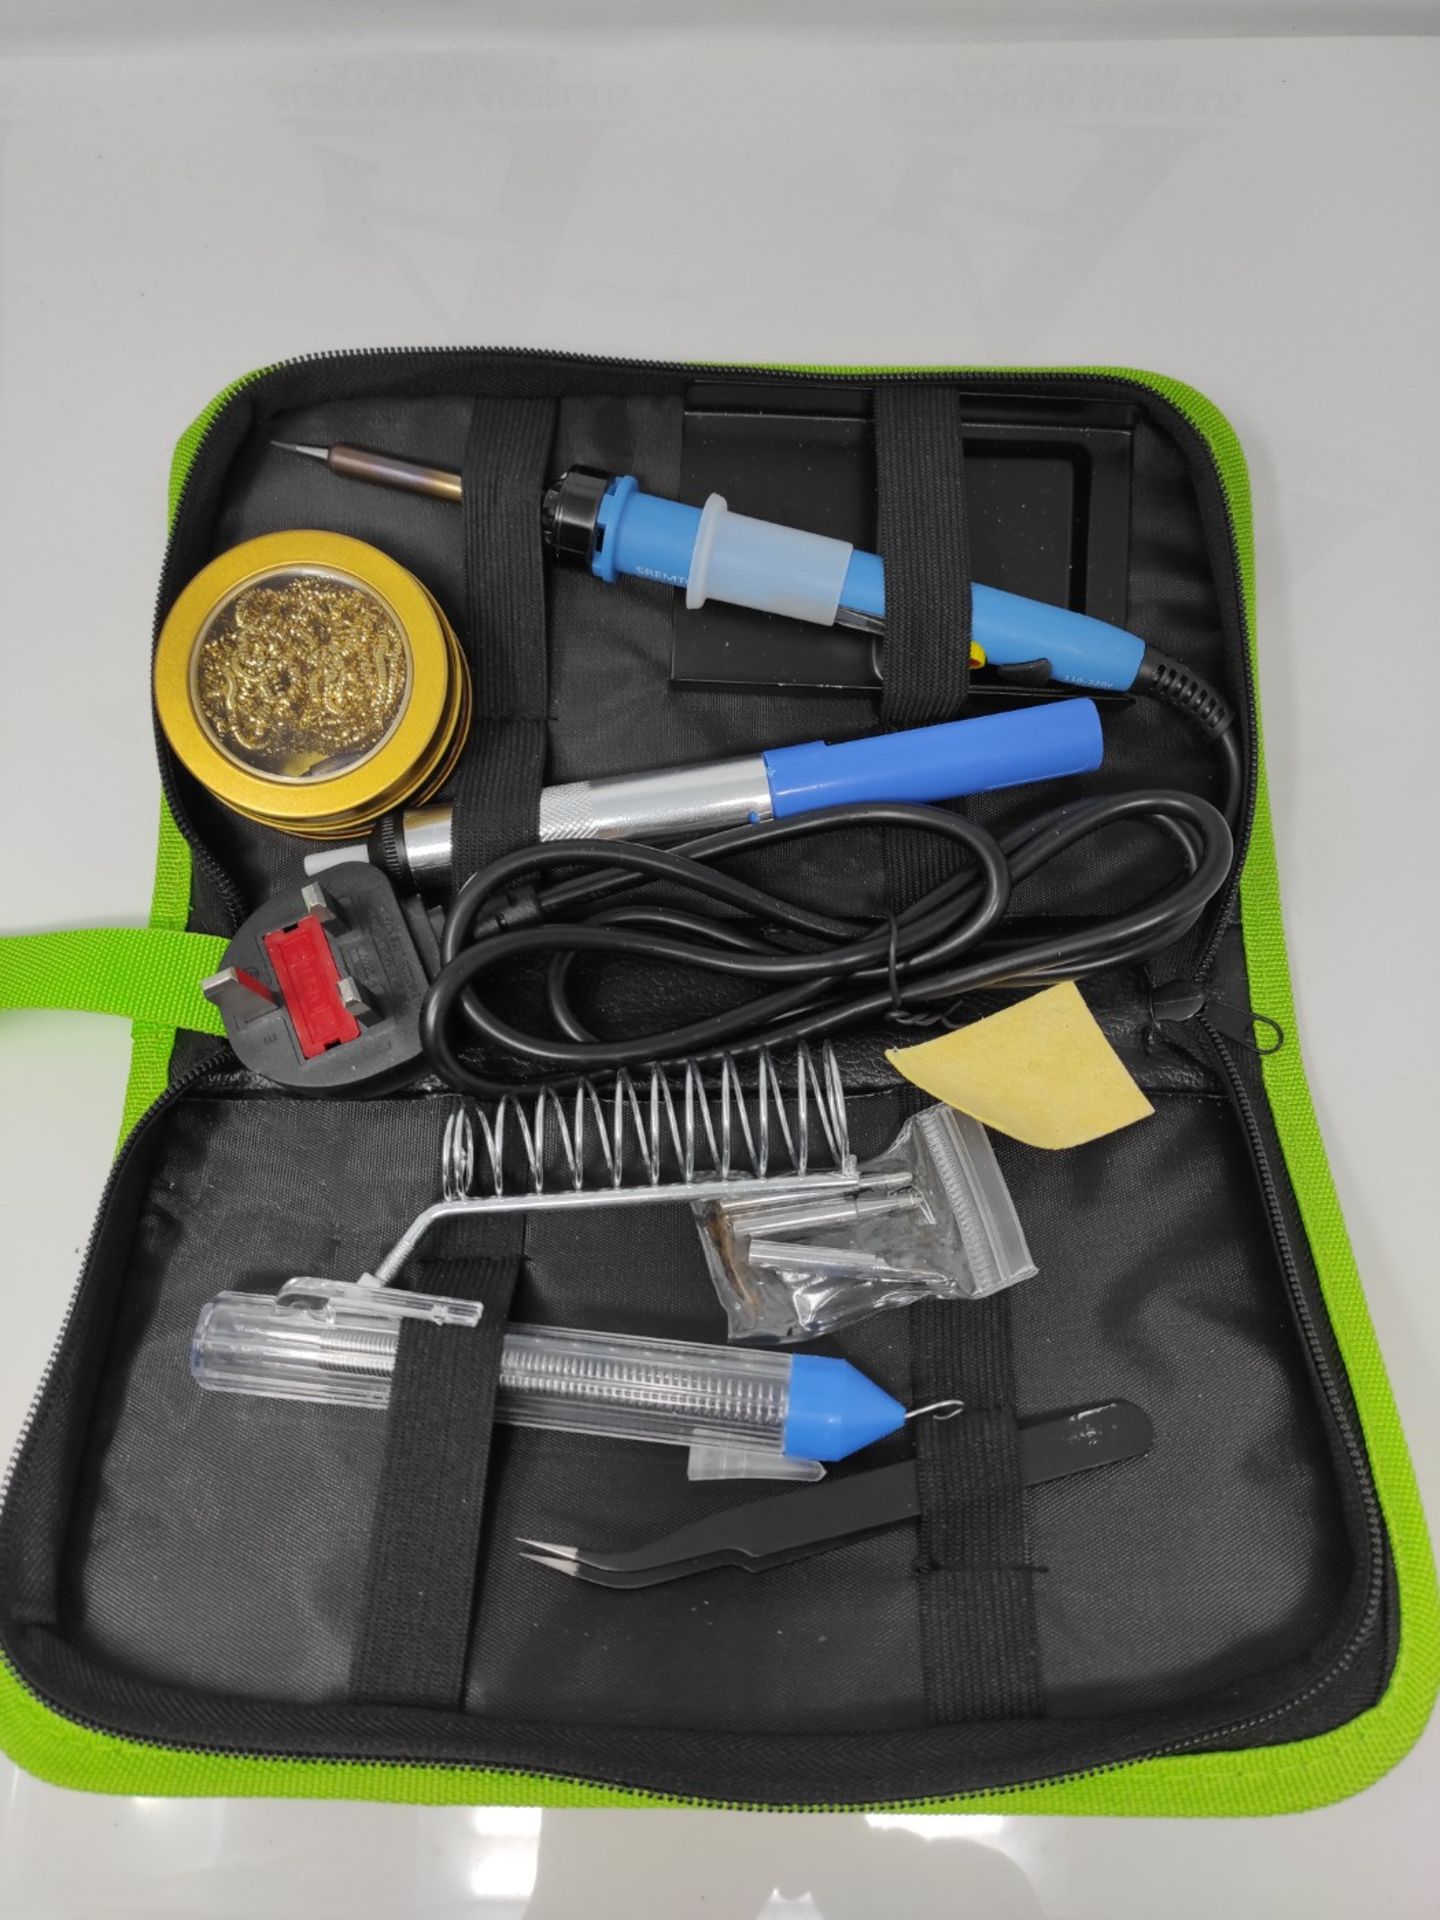 Soldering Iron Kit, SREMTCH 80W Digital LCD Soldering Iron with ON/Off Switch Adjustab